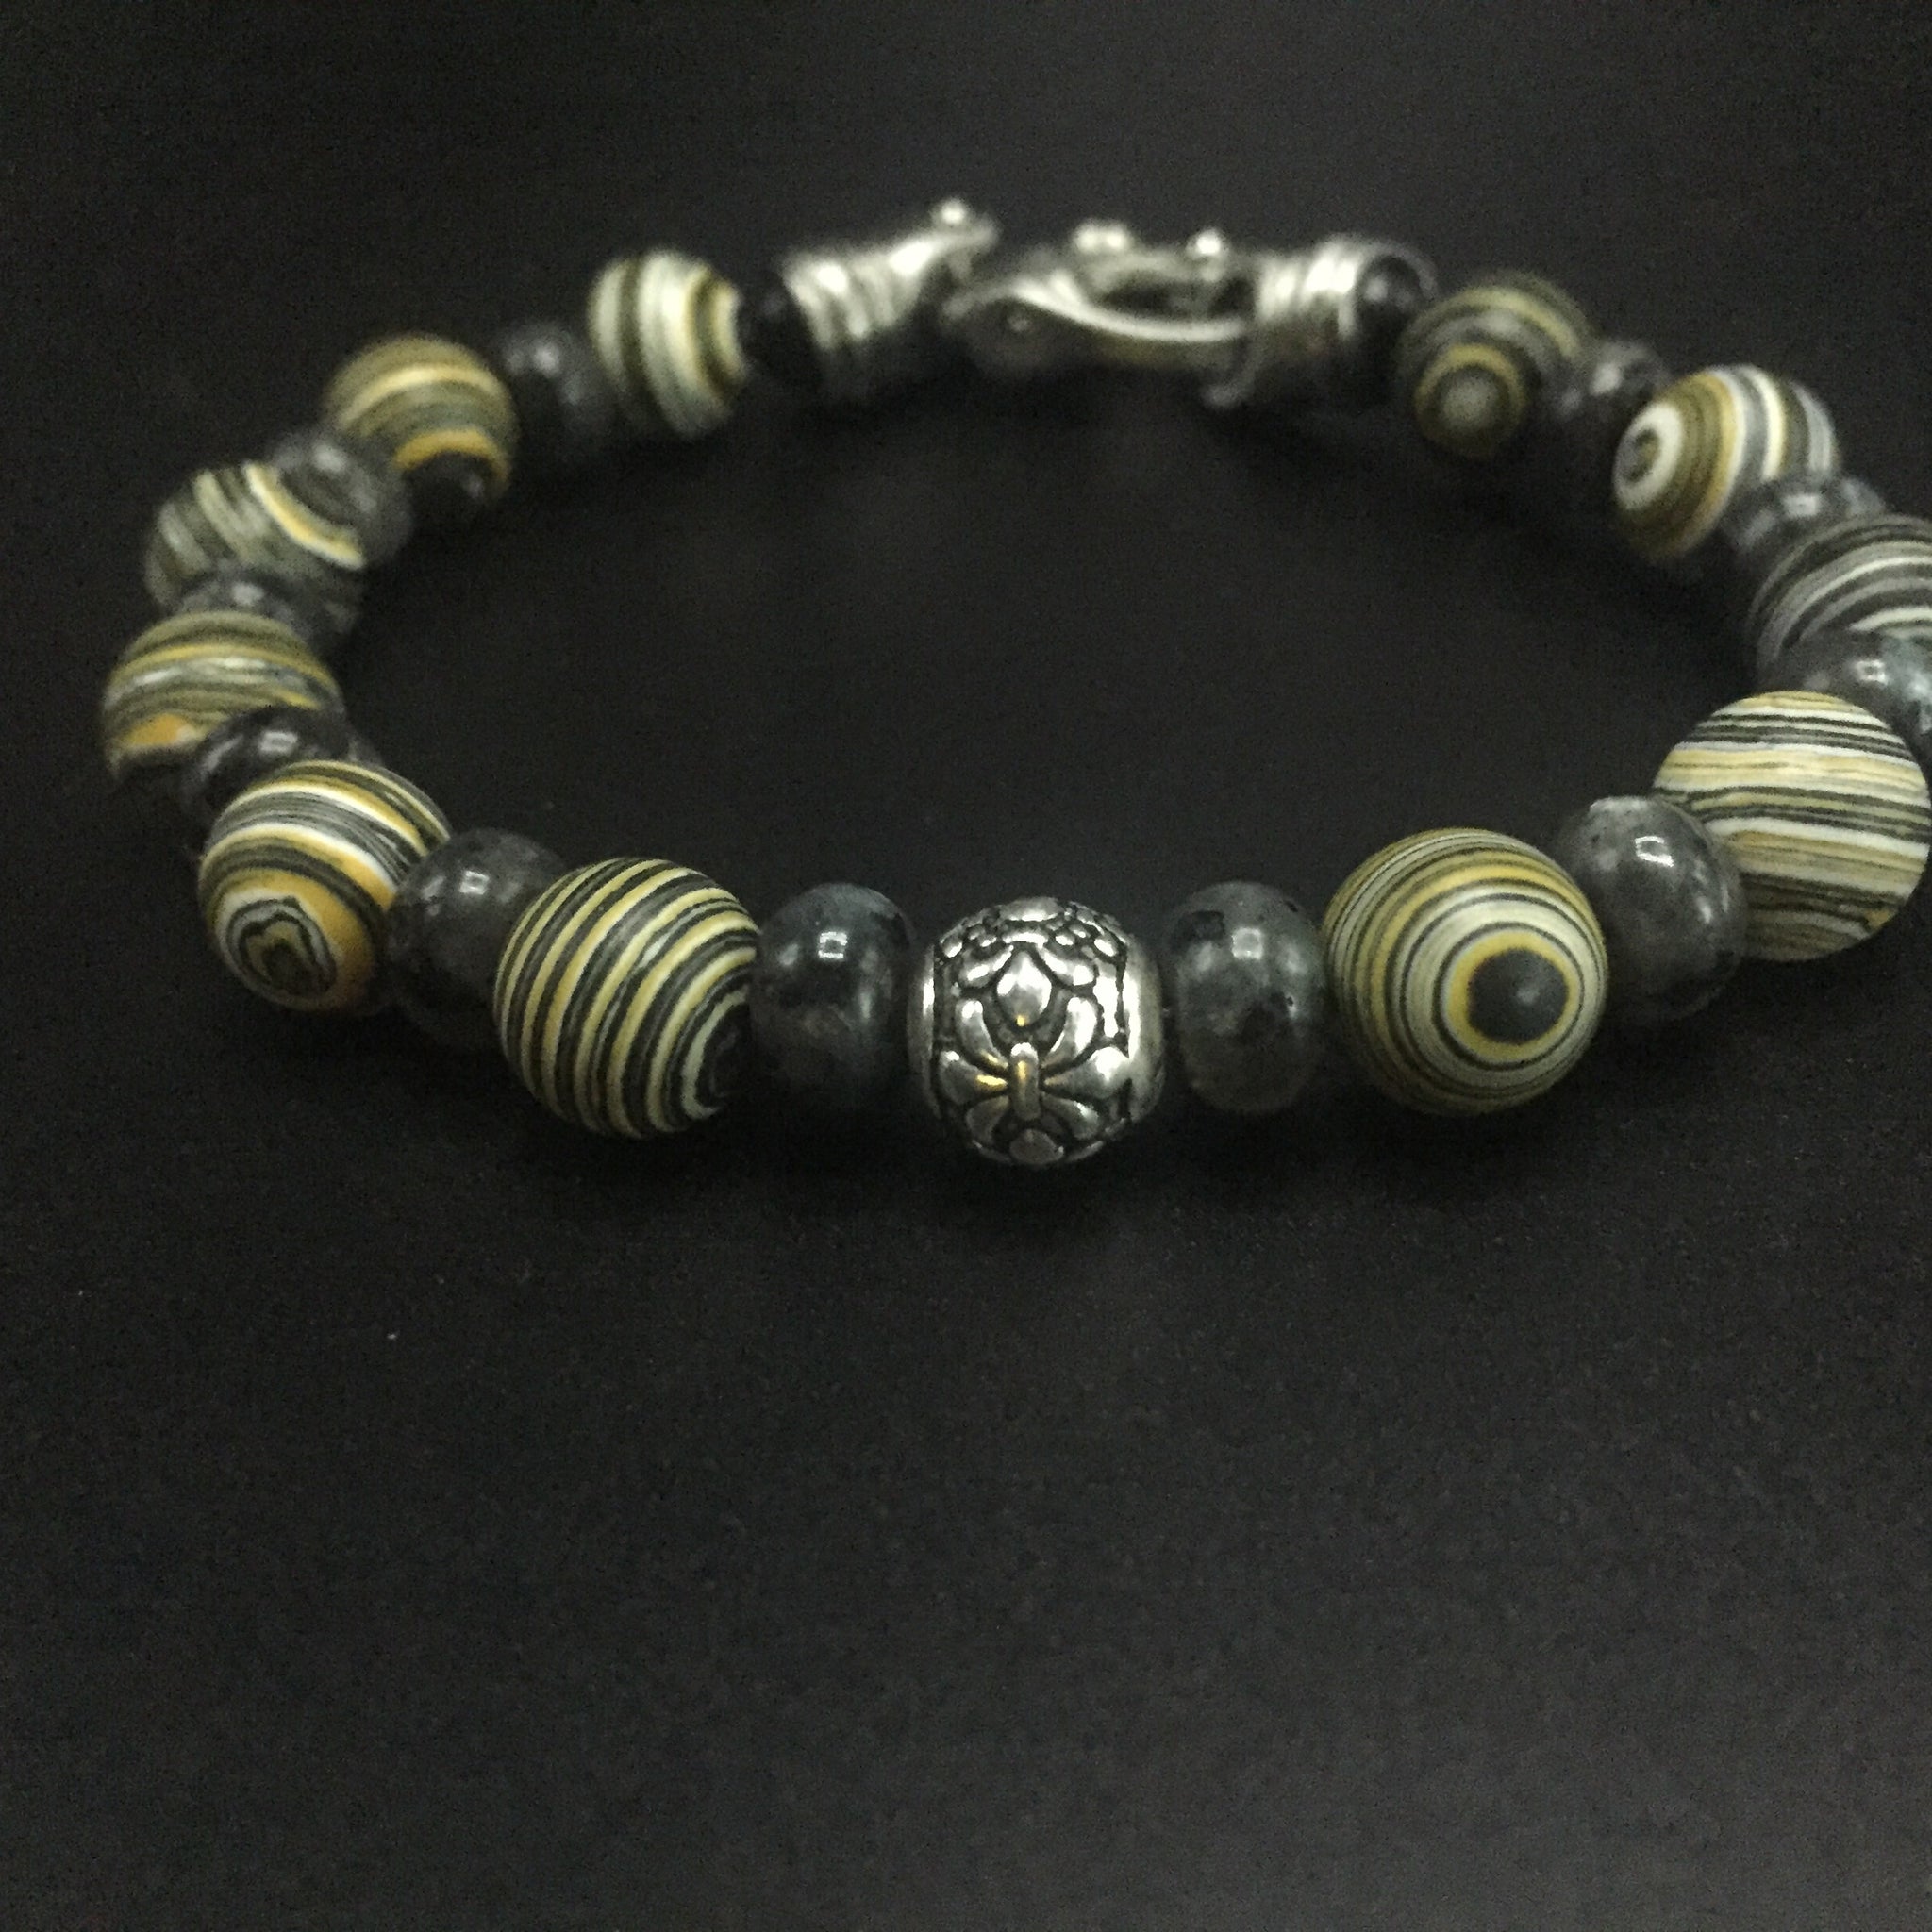 Yellow Malachite and gray Labradorite with a sterling silver center filagree bead and stainless steel clasp.